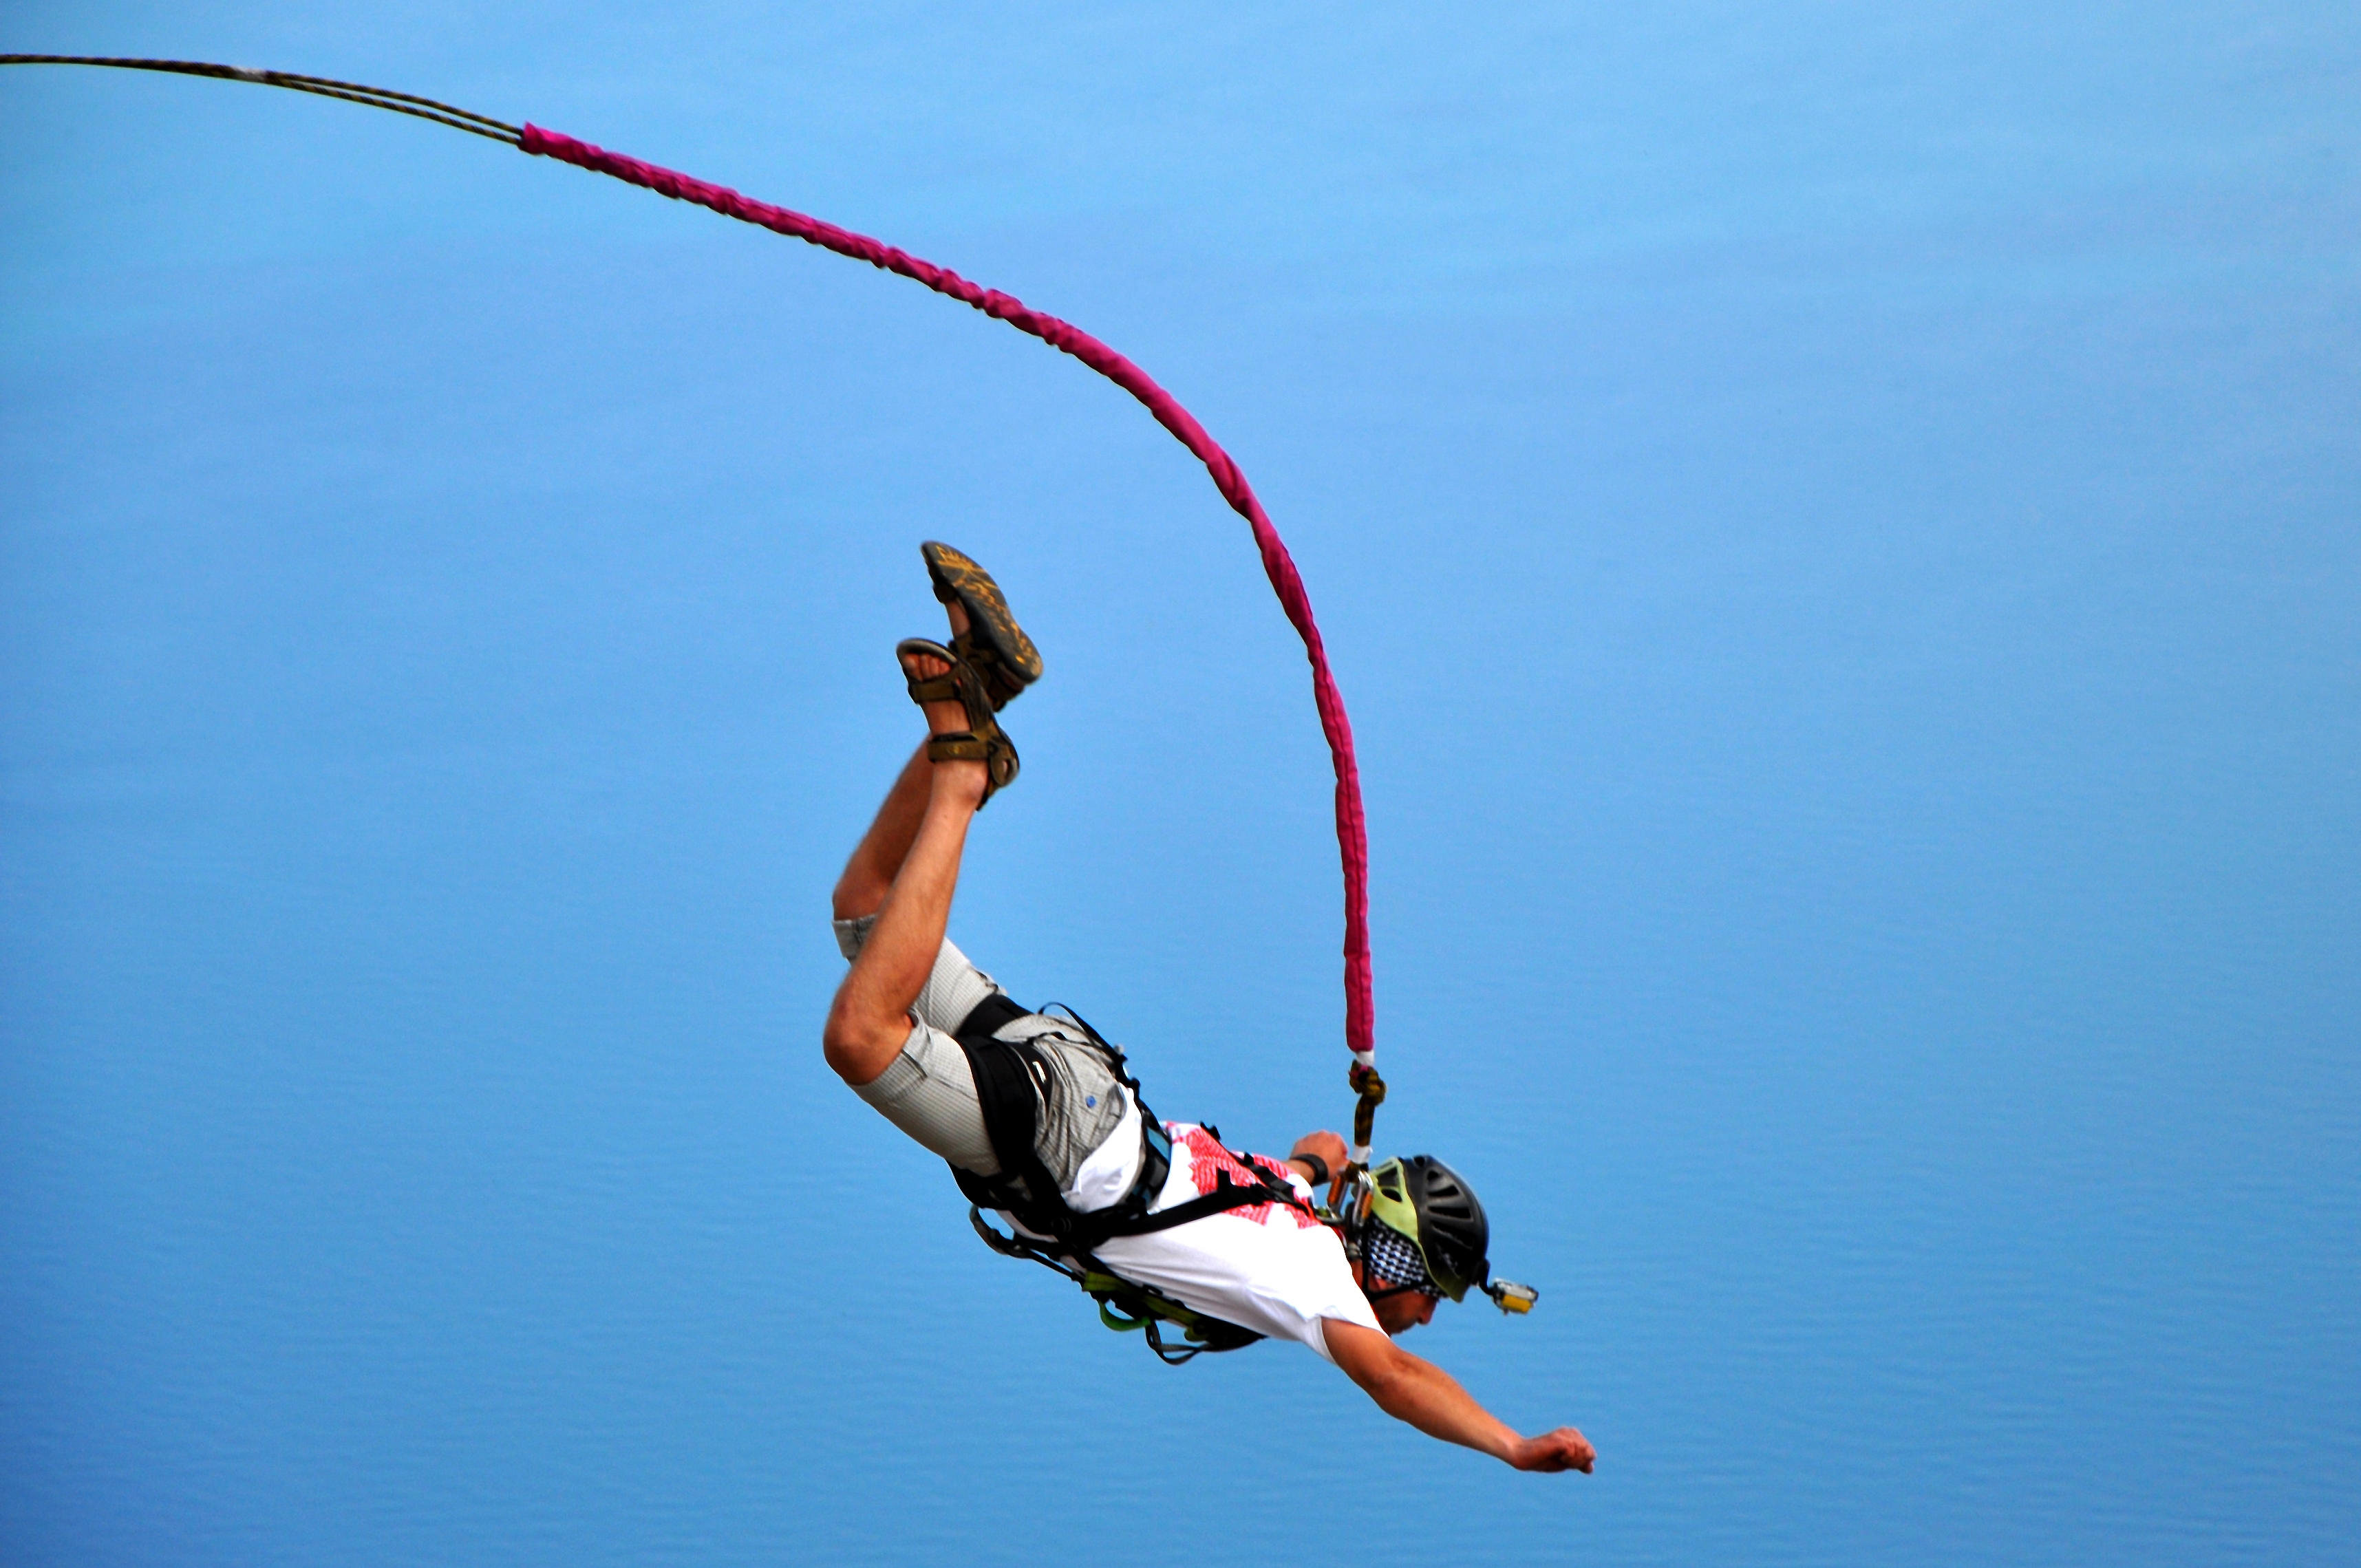 pattaya bungy jump travel guidebook must visit attractions in pattaya pattaya bungy jump nearby recommendation trip com